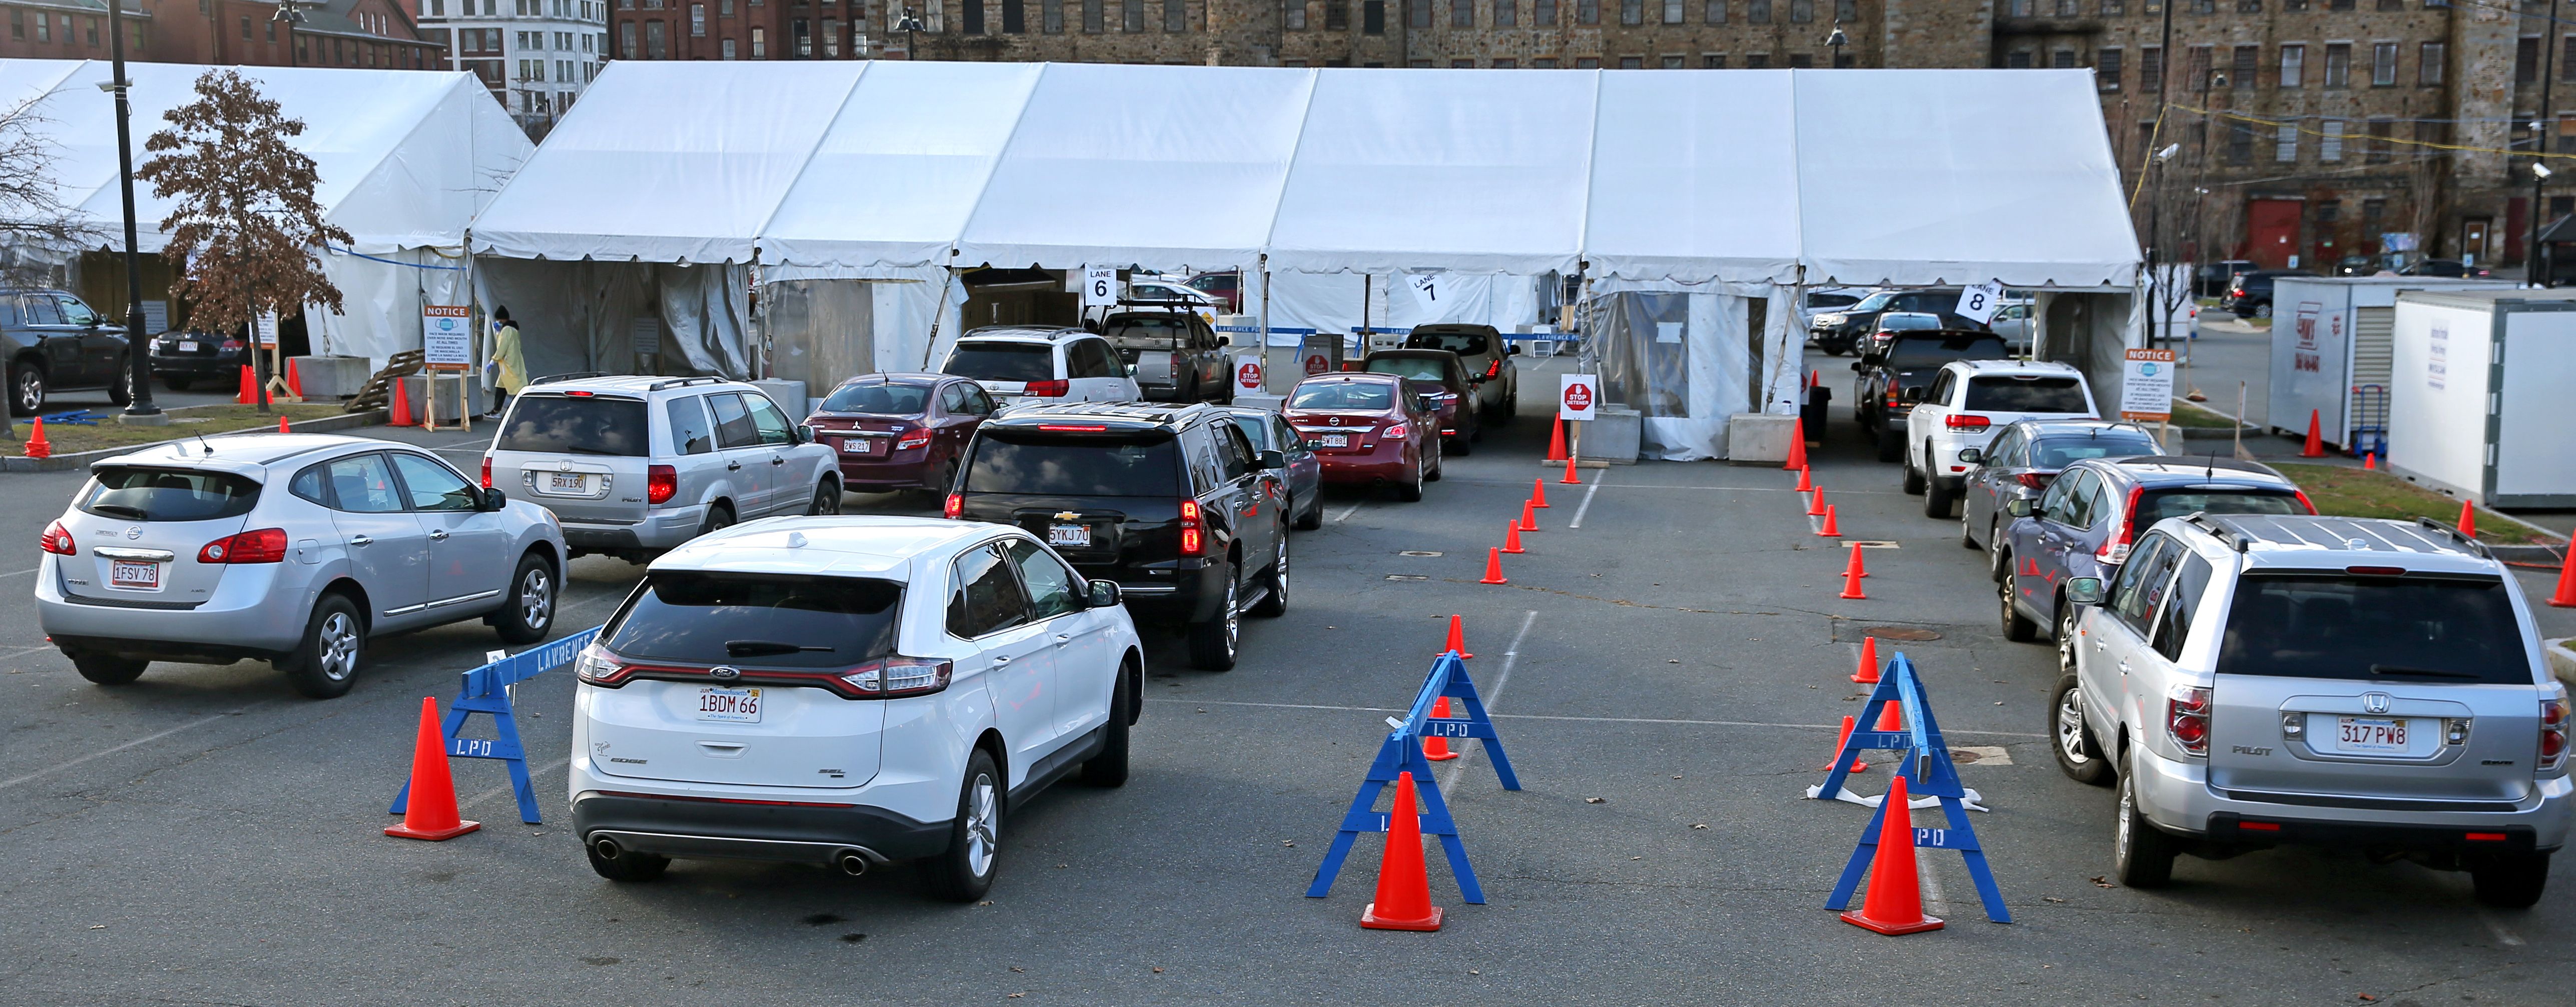 Picture of cars lining up in front of a white tent to get tested for coronavirus in Lawrence, MA